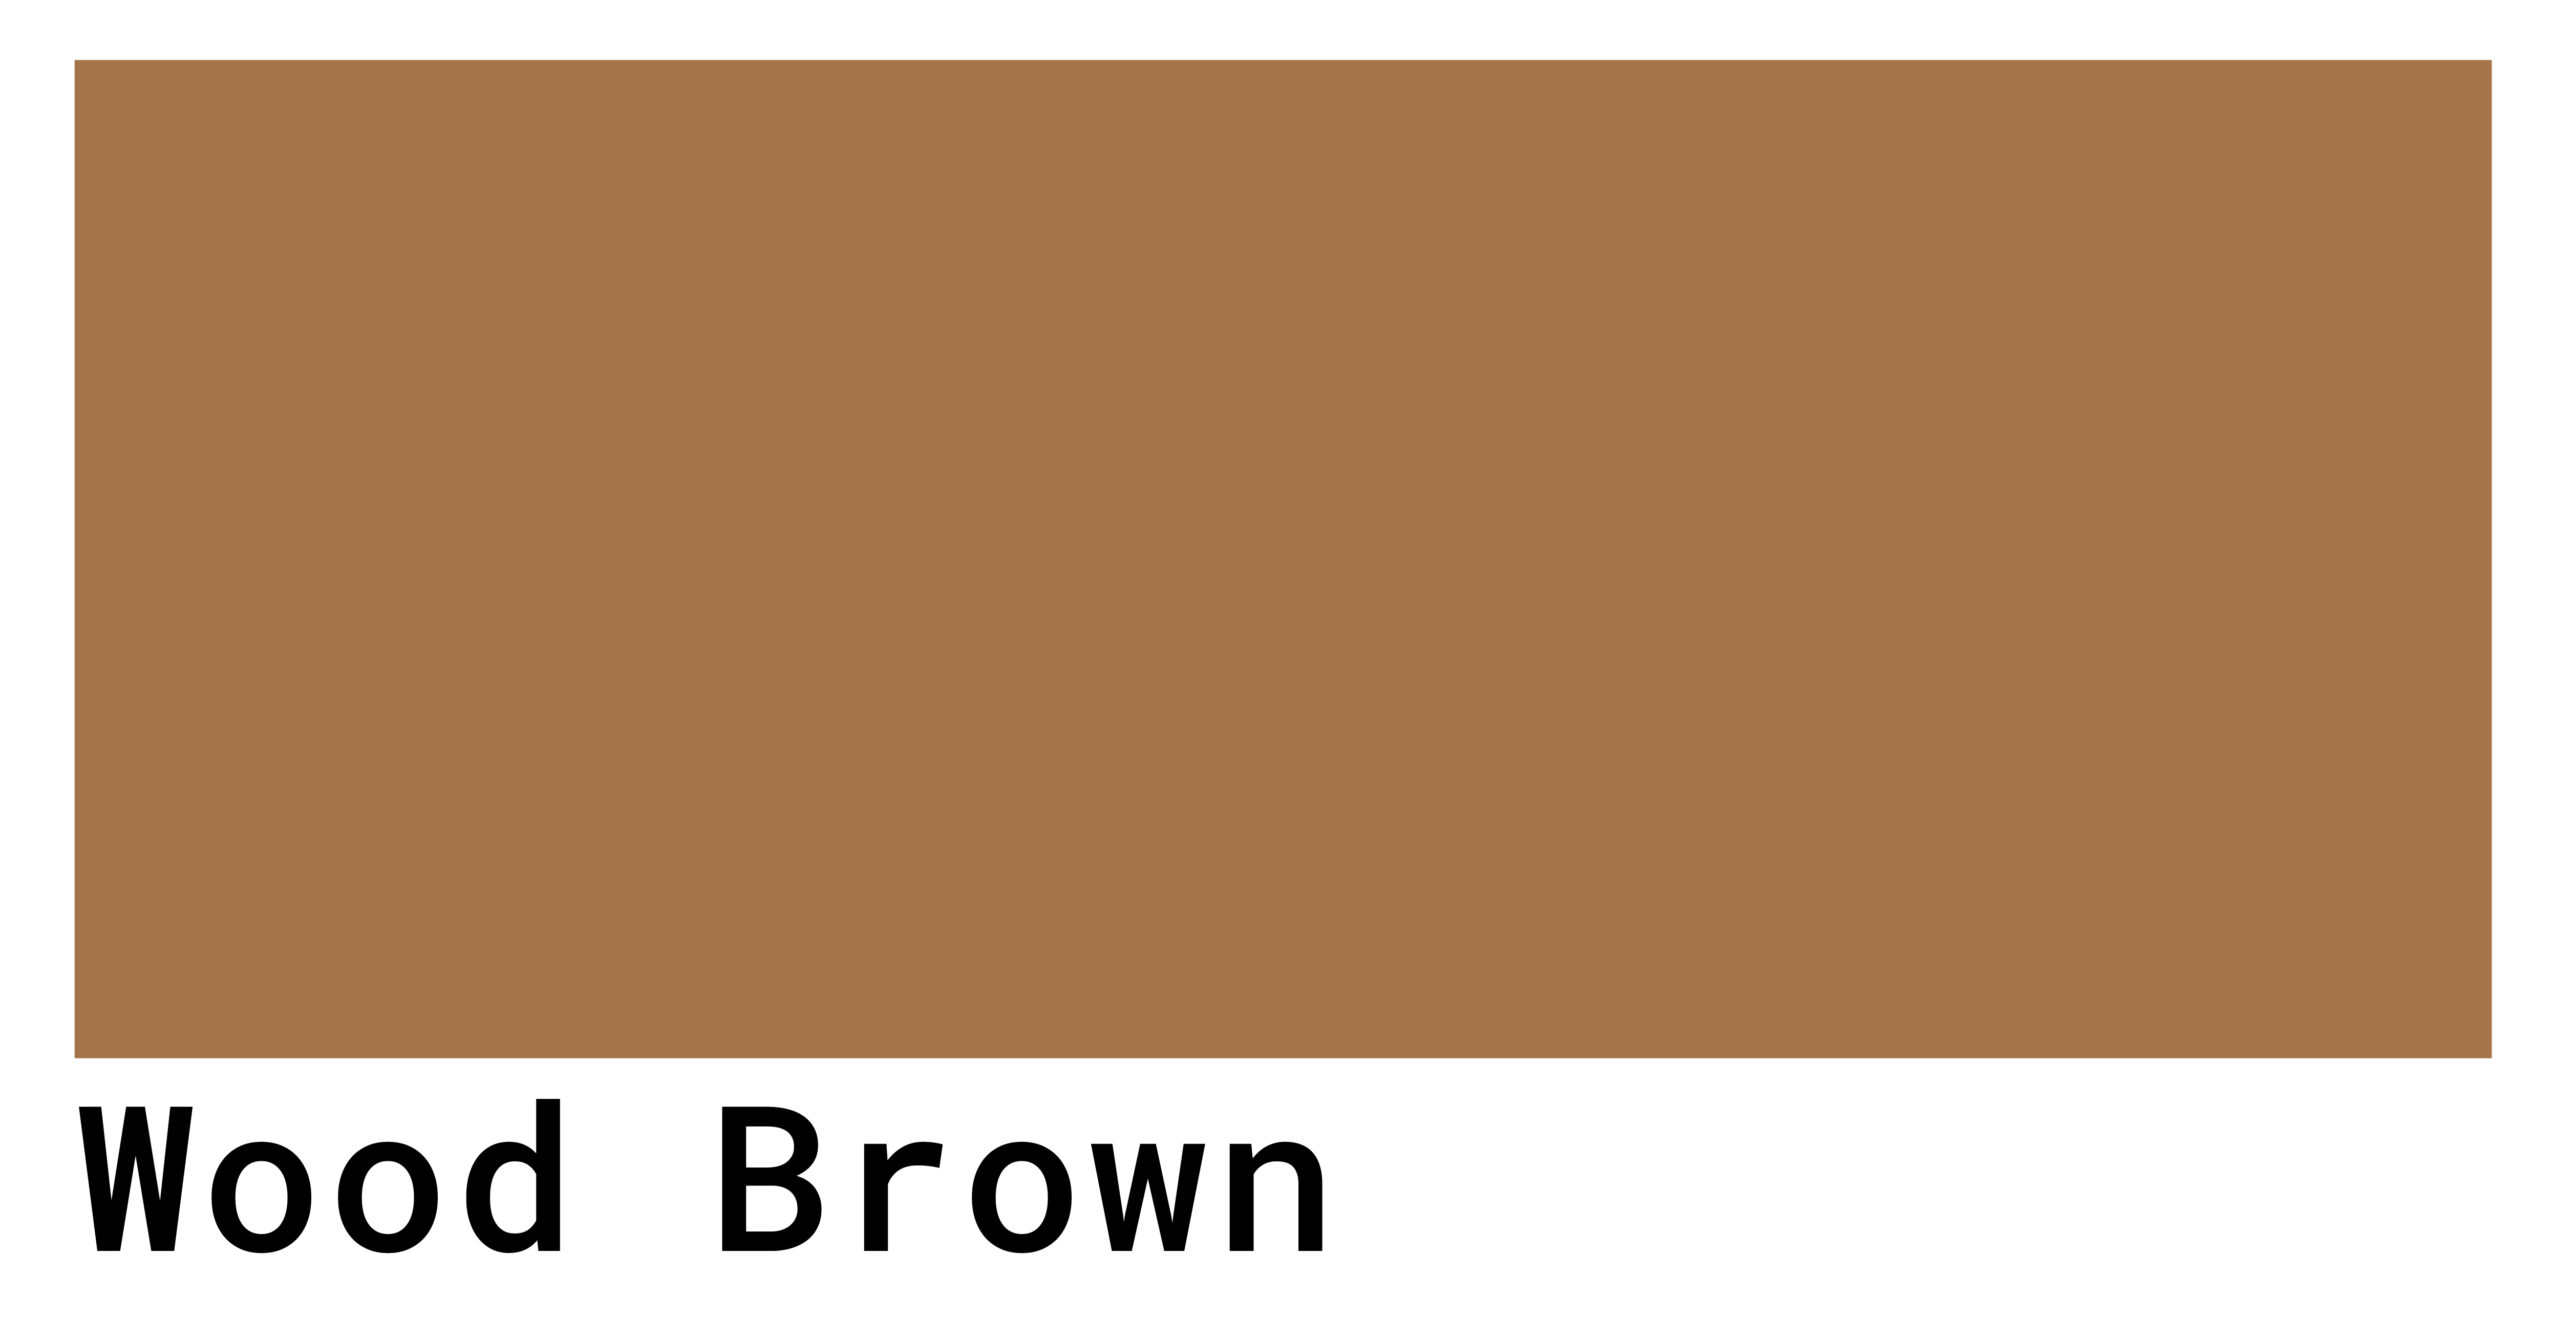 wood brown color swatch scaled